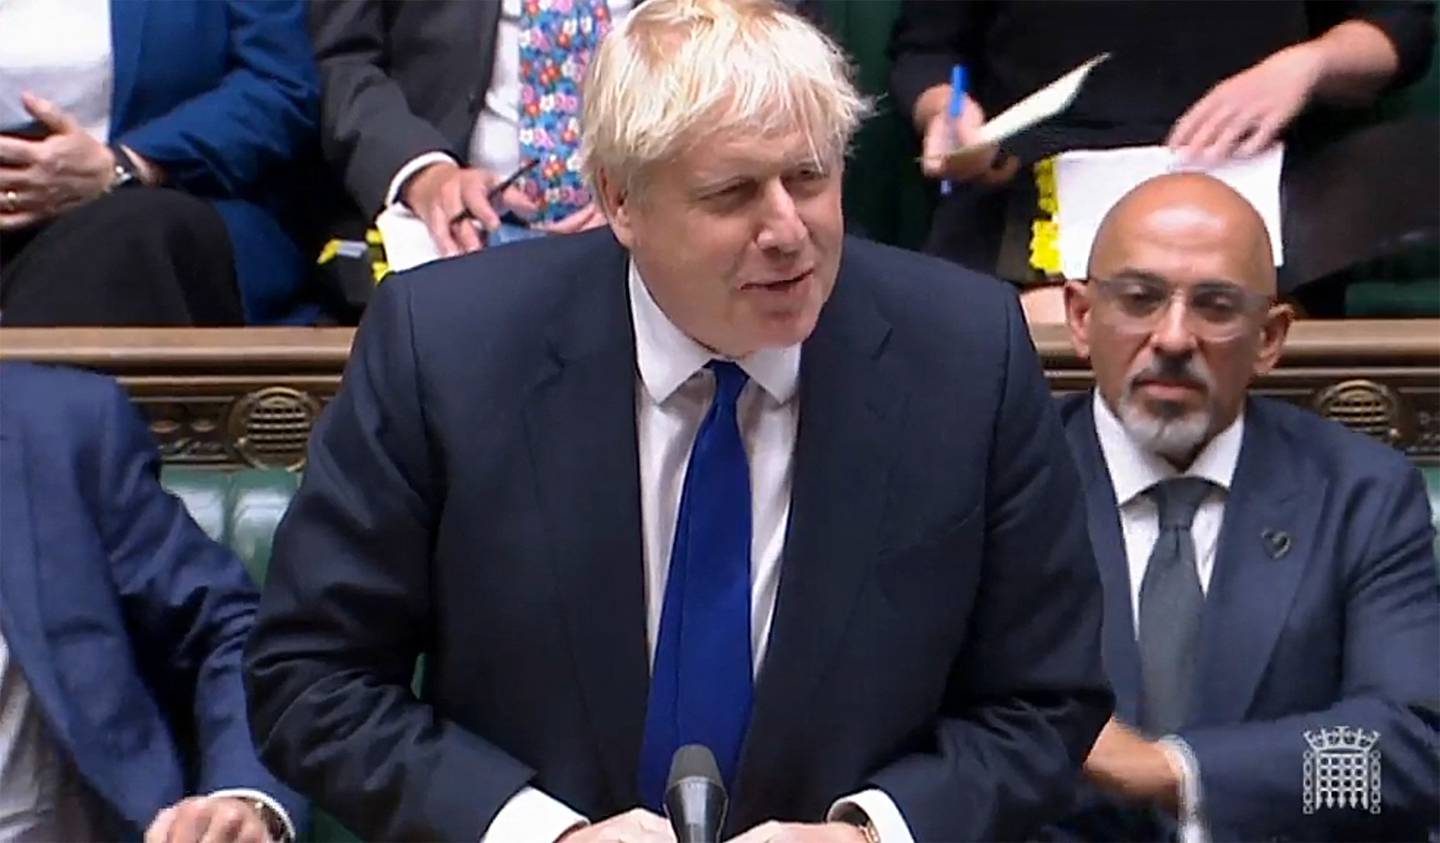 Boris Johnson speaking during Prime Minister's Questions in the House of Commons. AFP